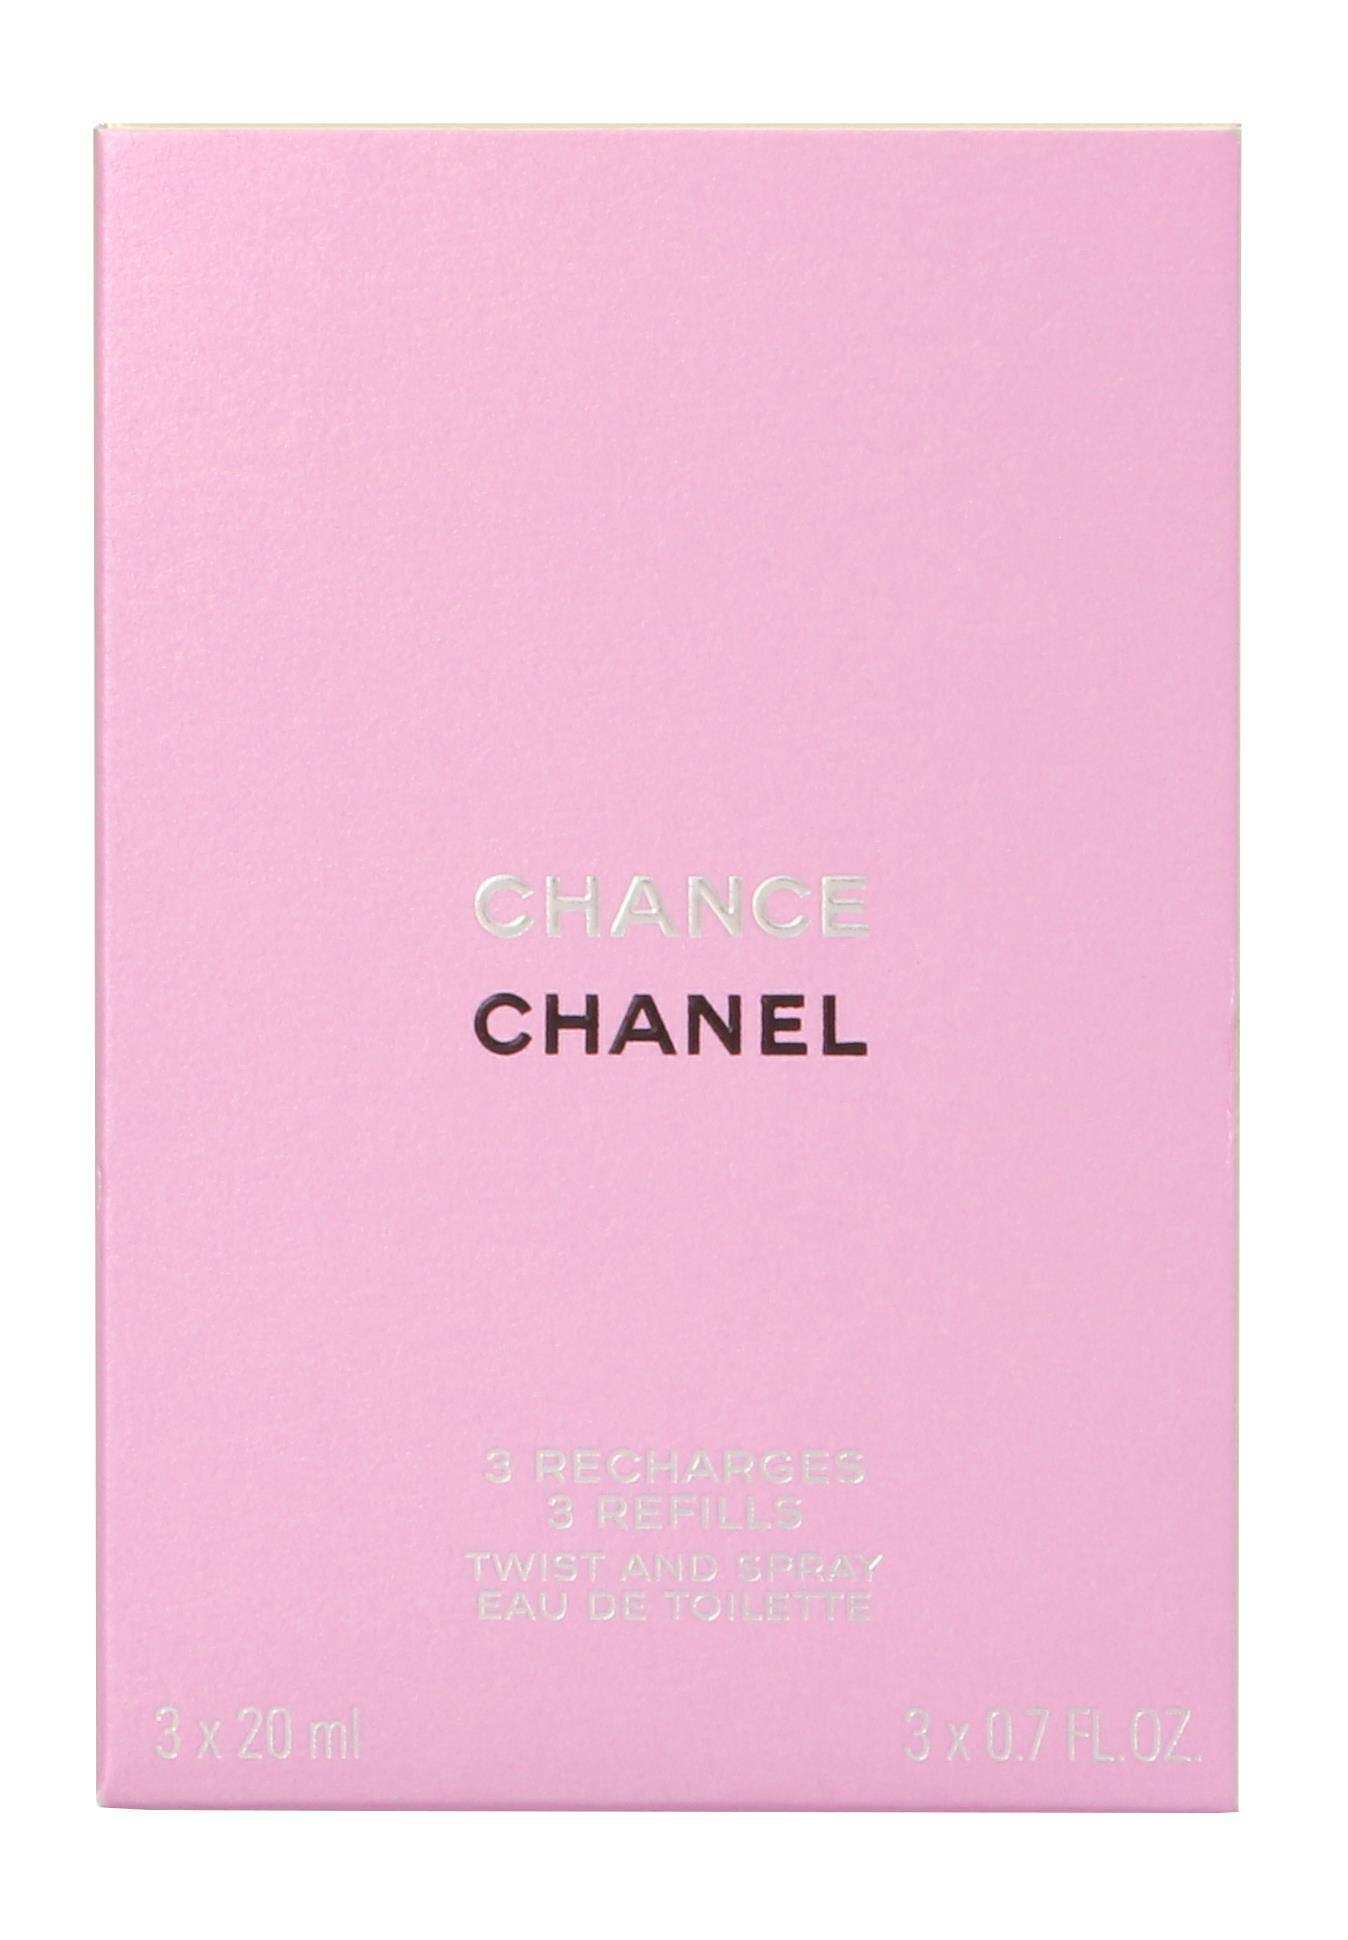 CHANEL CHANCE Twist  Spray Trio Limited Edition  Perfume gift sets  Fragrance Makeup gift sets